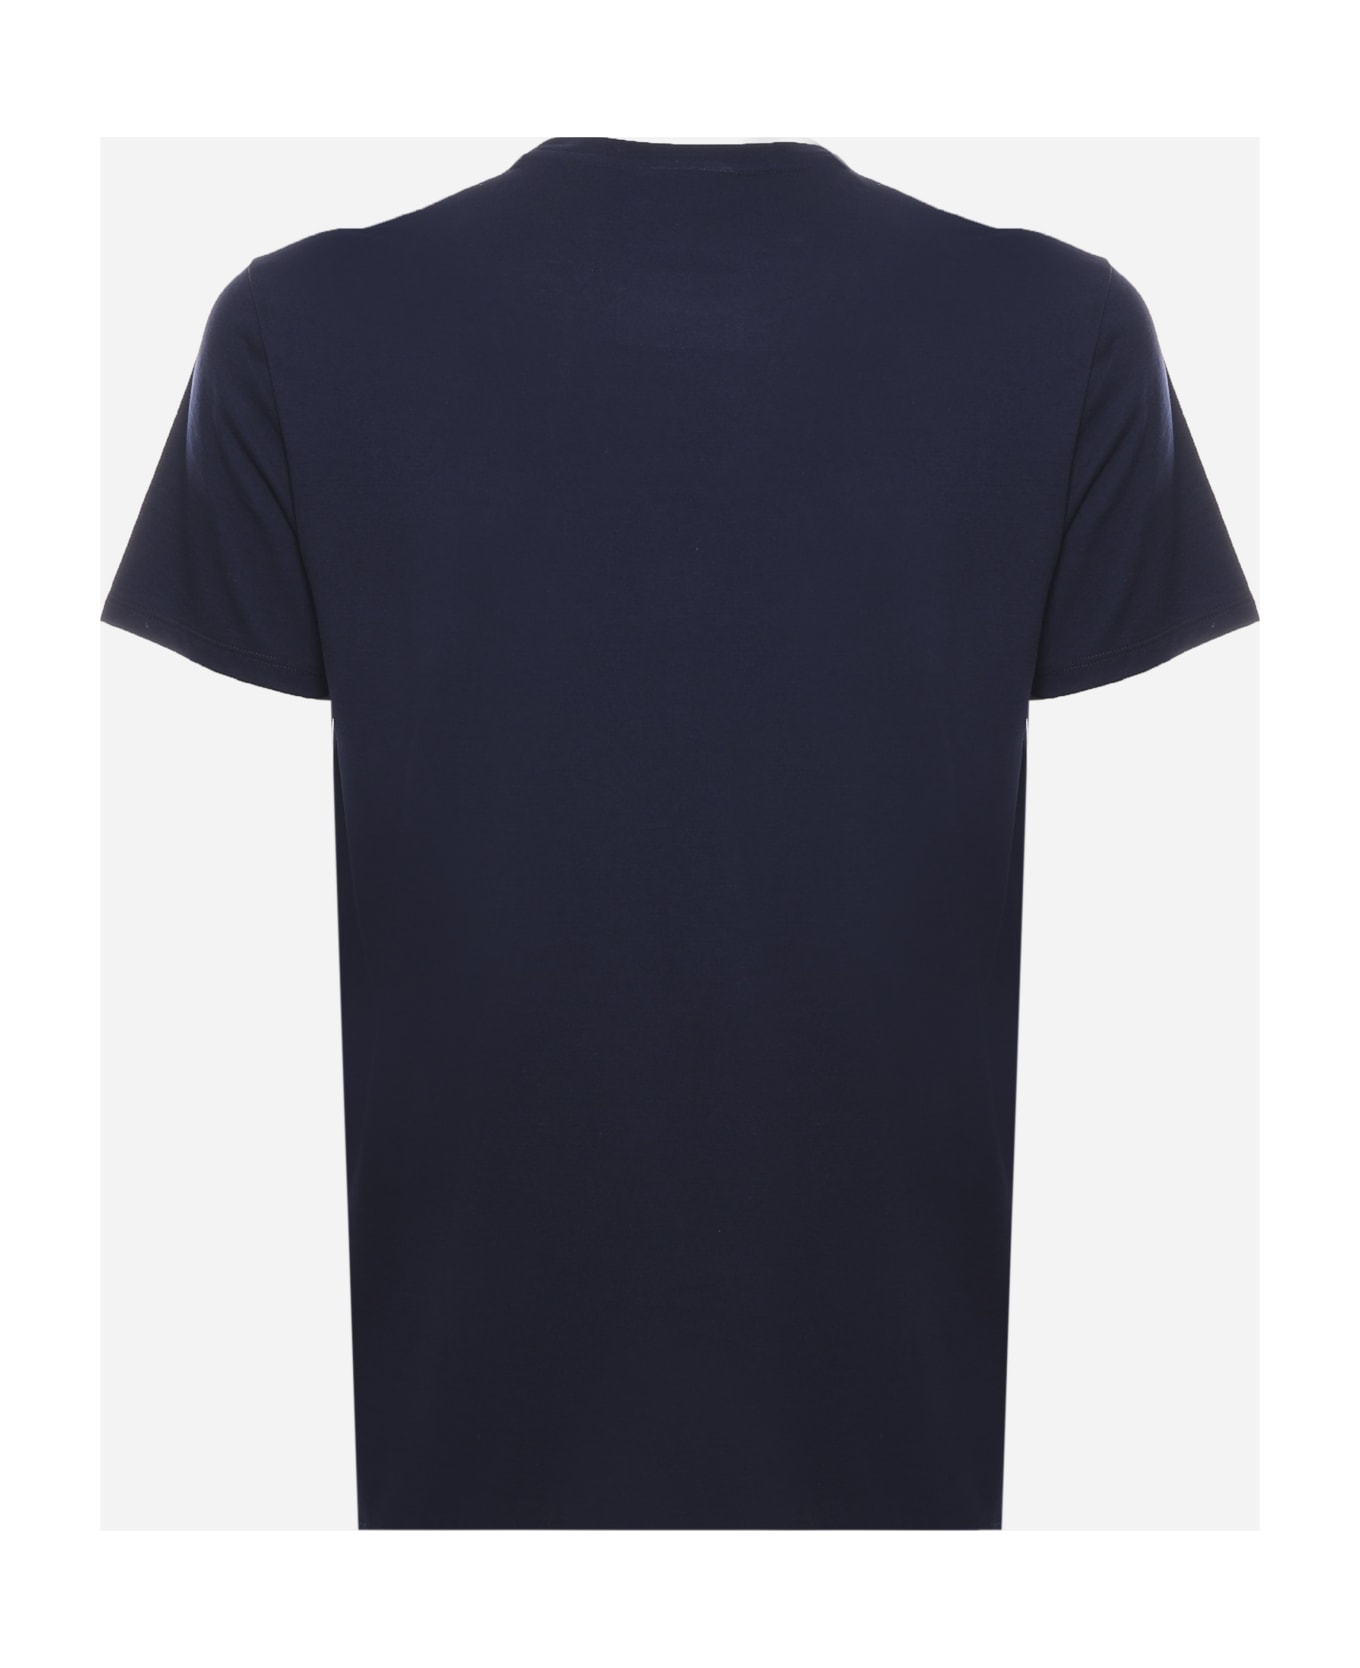 Lacoste Navy Blue Cotton Jersey T-shirt シャツ